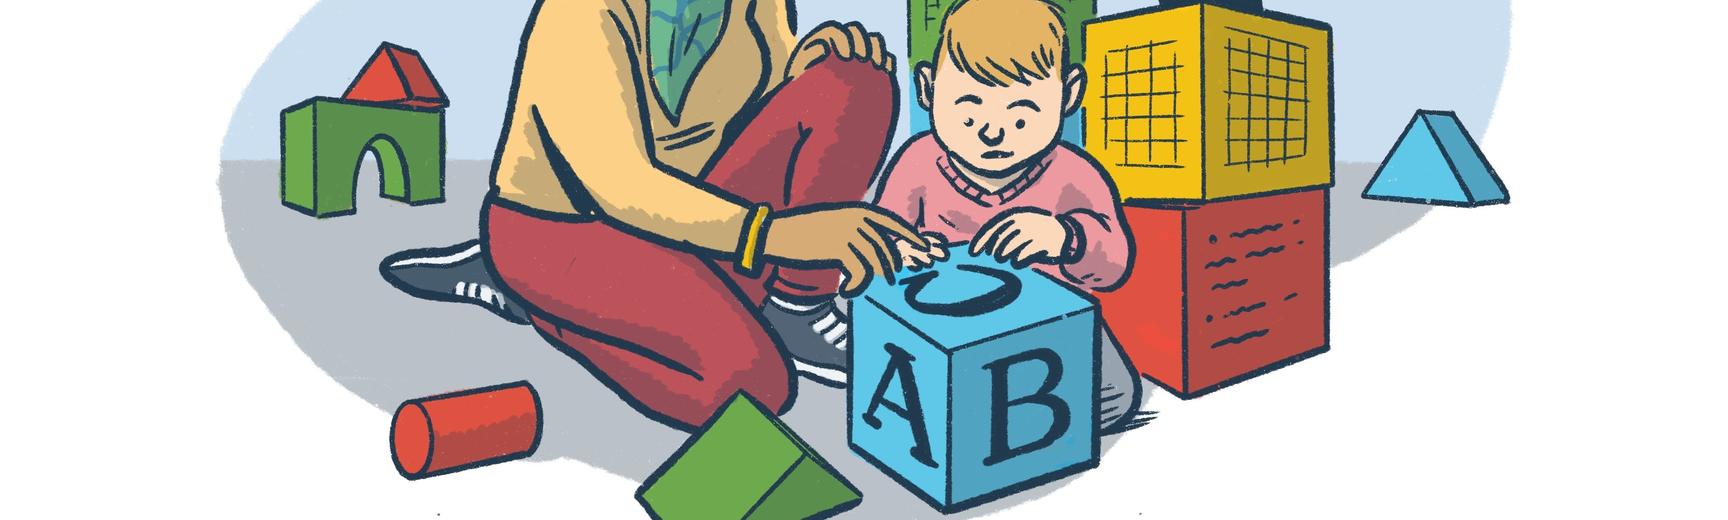 Illustration of a very young child playing with colourful building blocks. 